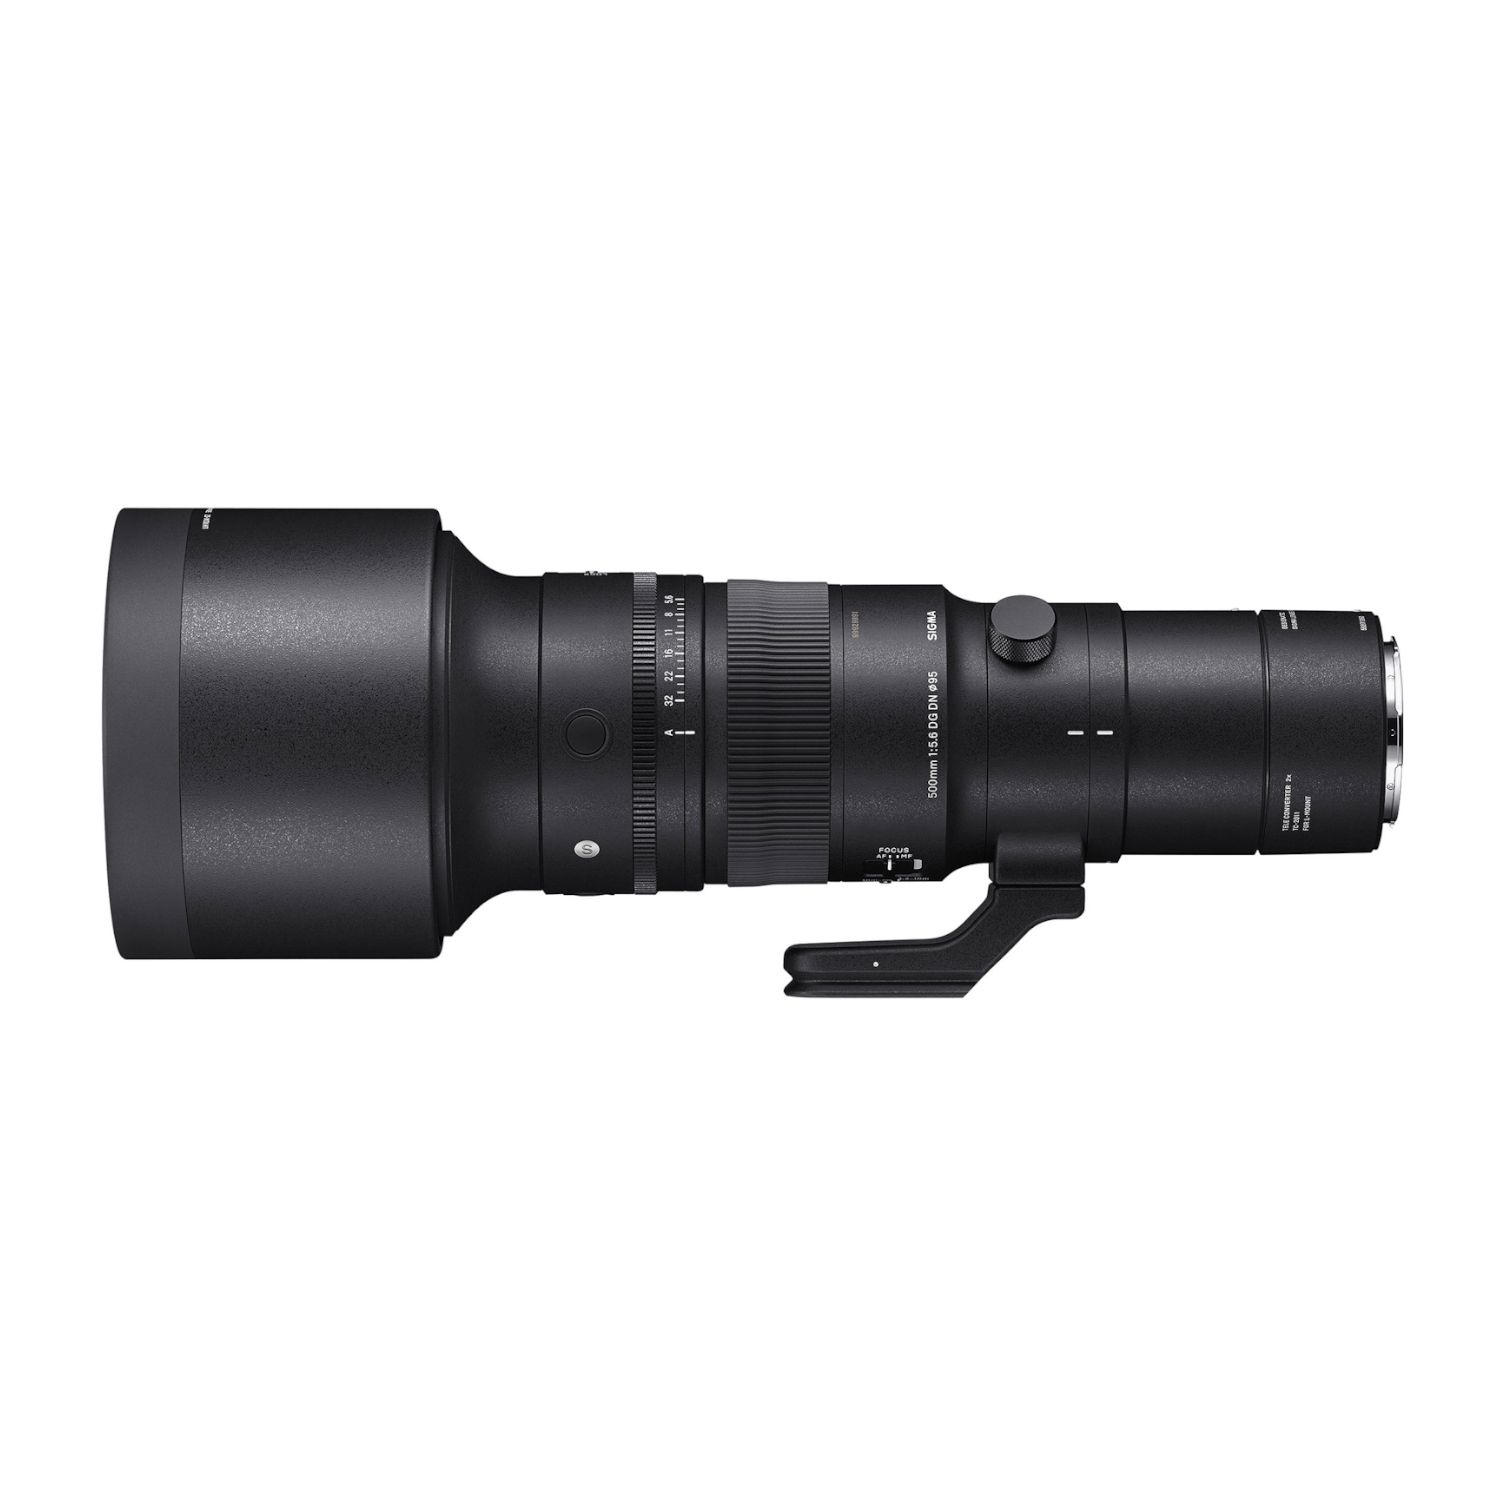 Sigma 500mm f/5.6 DG DN OS Sports Lens for Sony E-Mount